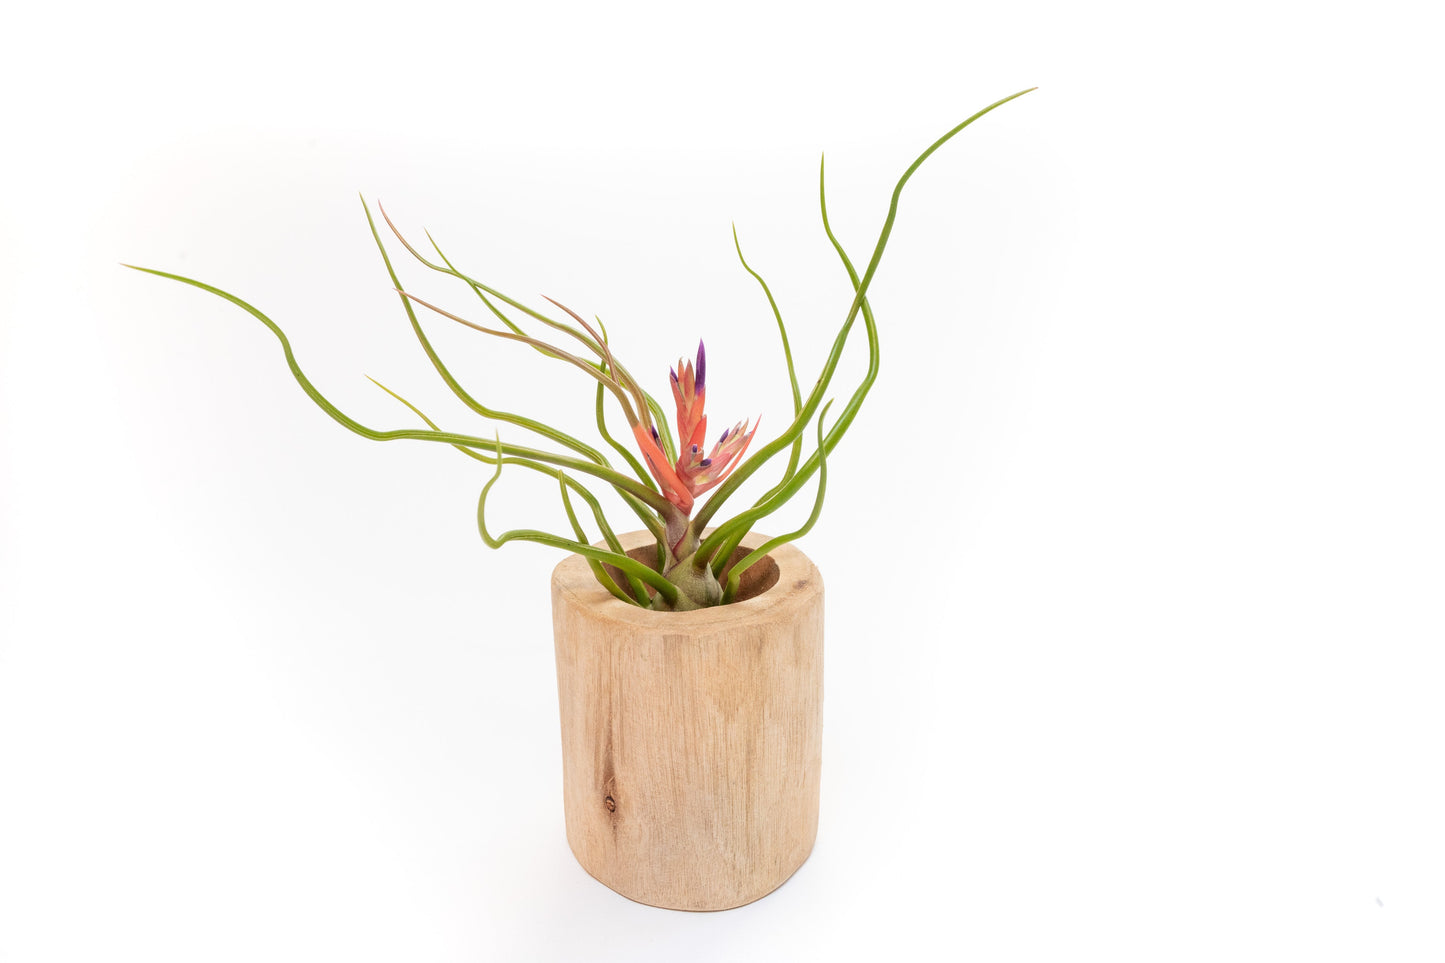 Large Driftwood Container - Choose Your Custom Tillandsia Air Plant